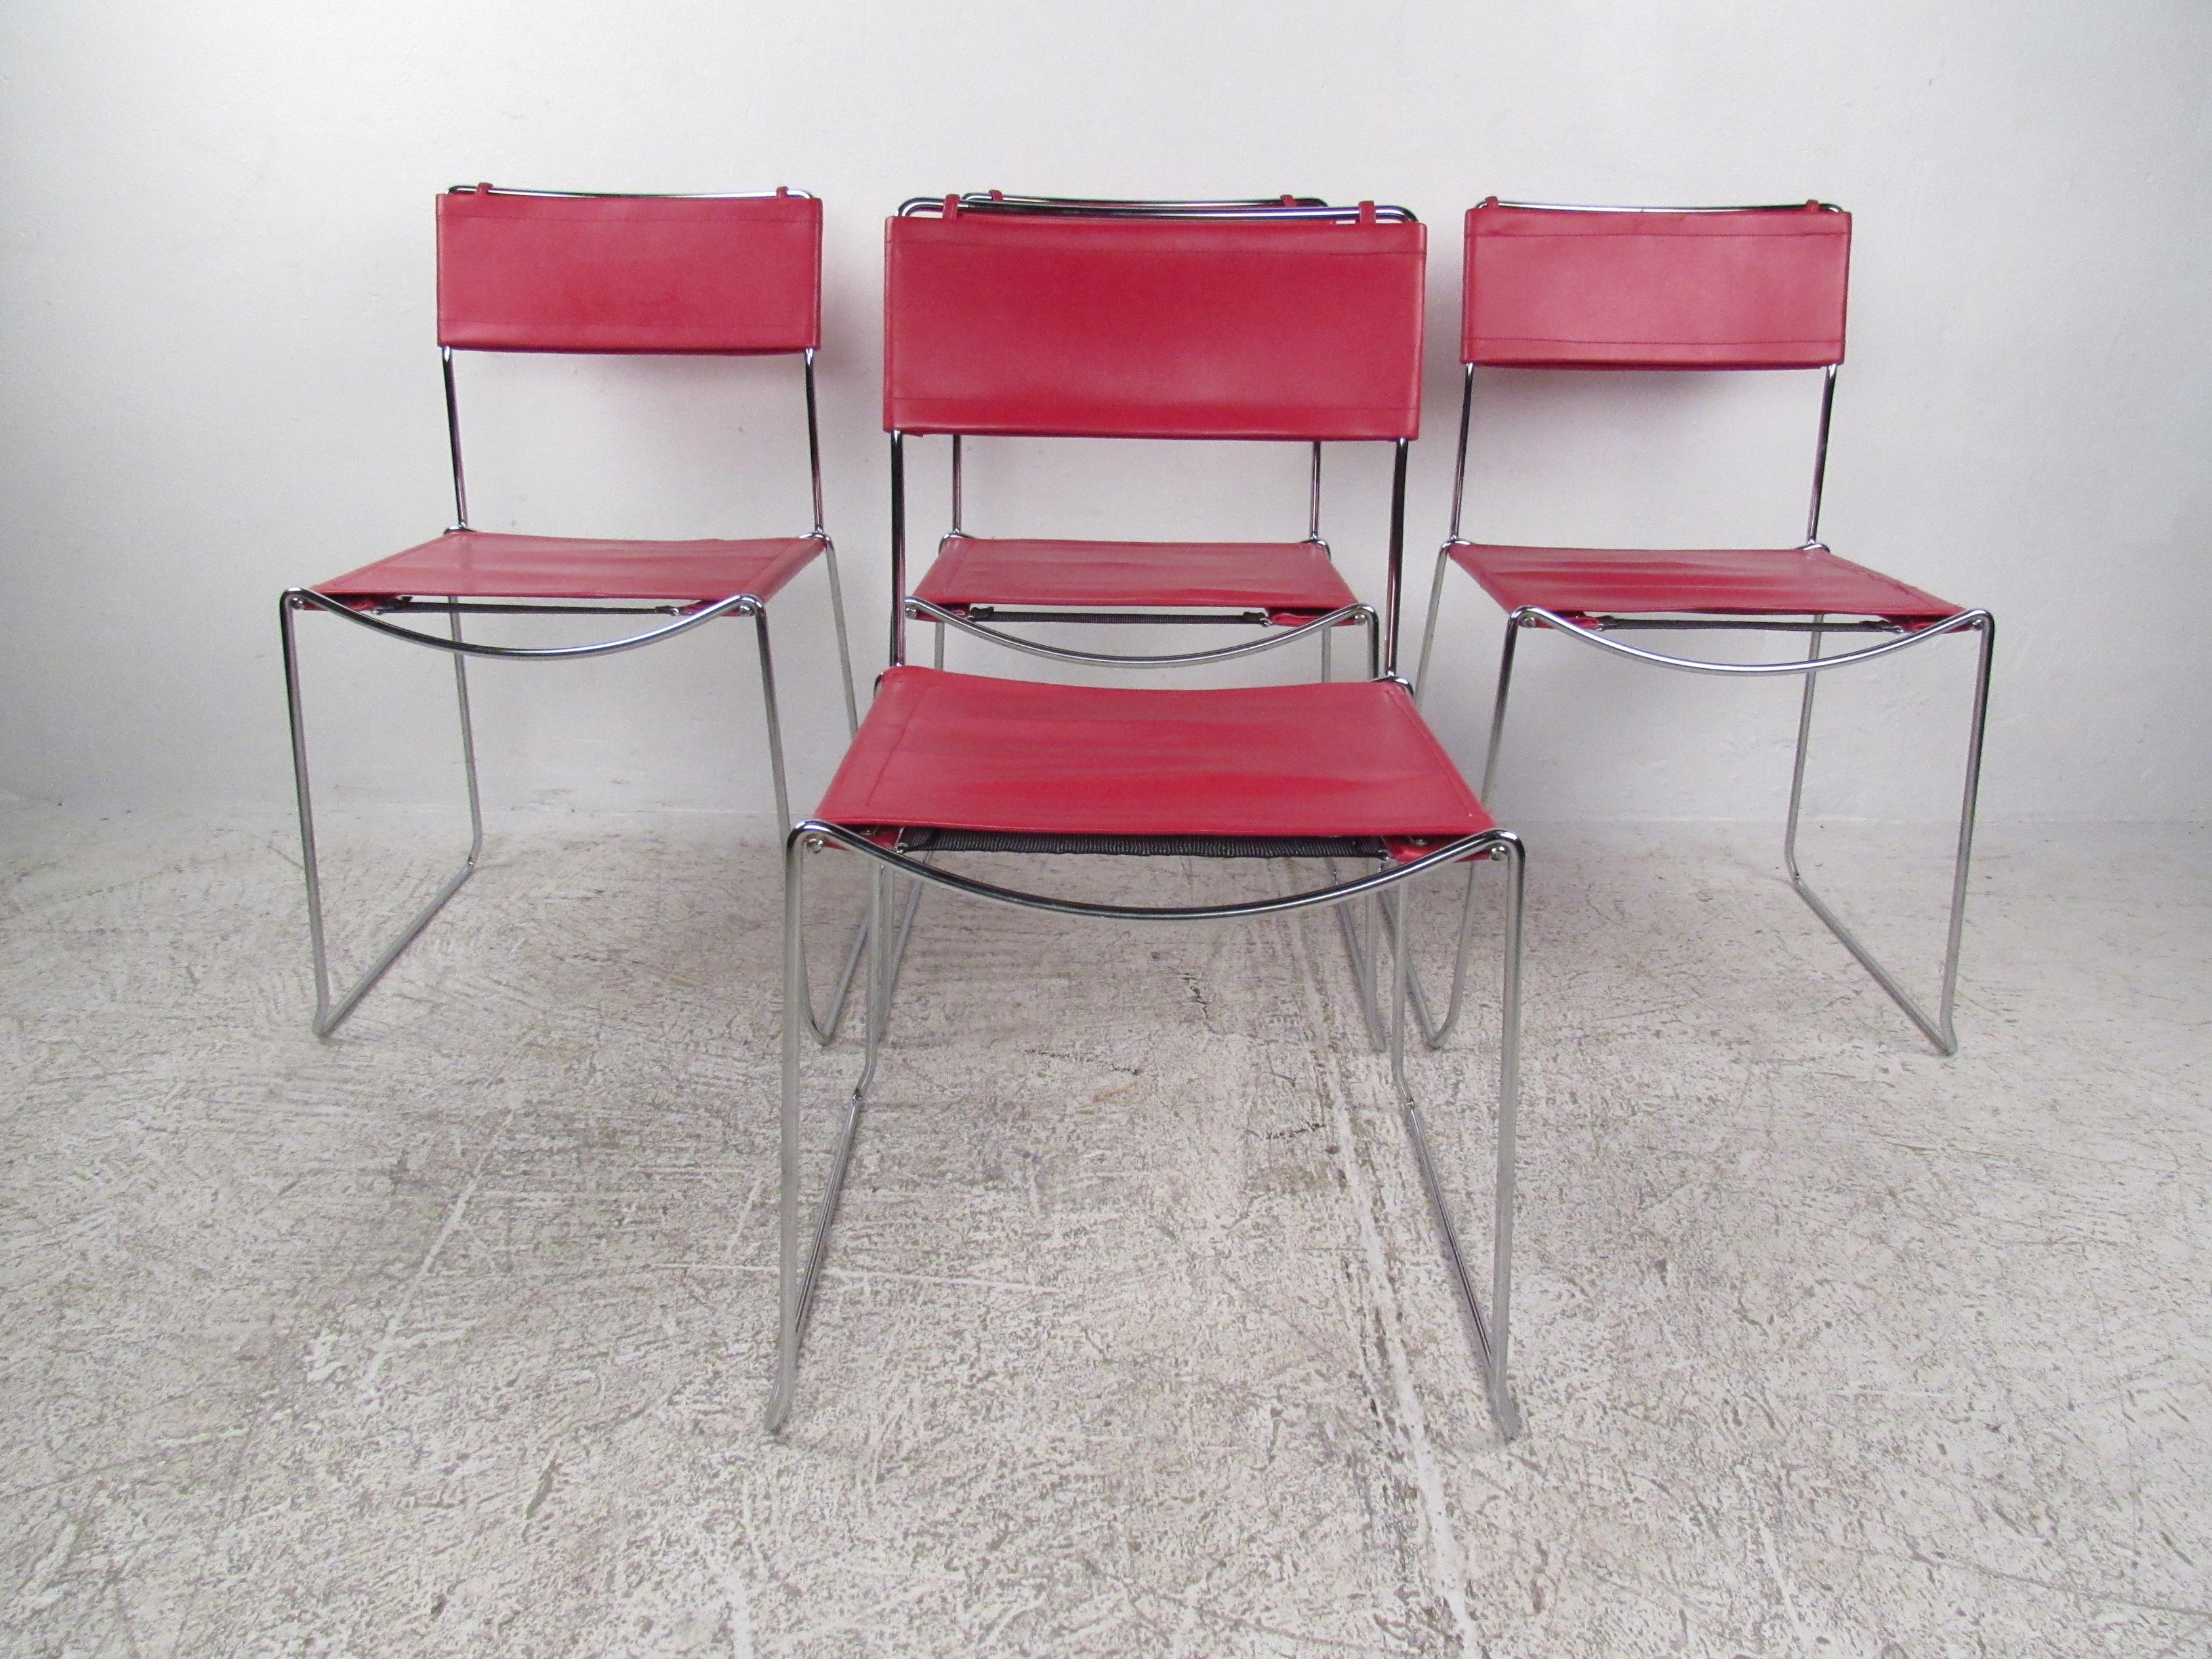 A set of Mid-Century Modern red leather and chrome chairs. Vibrant design with a stunning chrome accent. Perfect for any bar/office/home setting. Please confirm pickup with seller (NY/NJ).